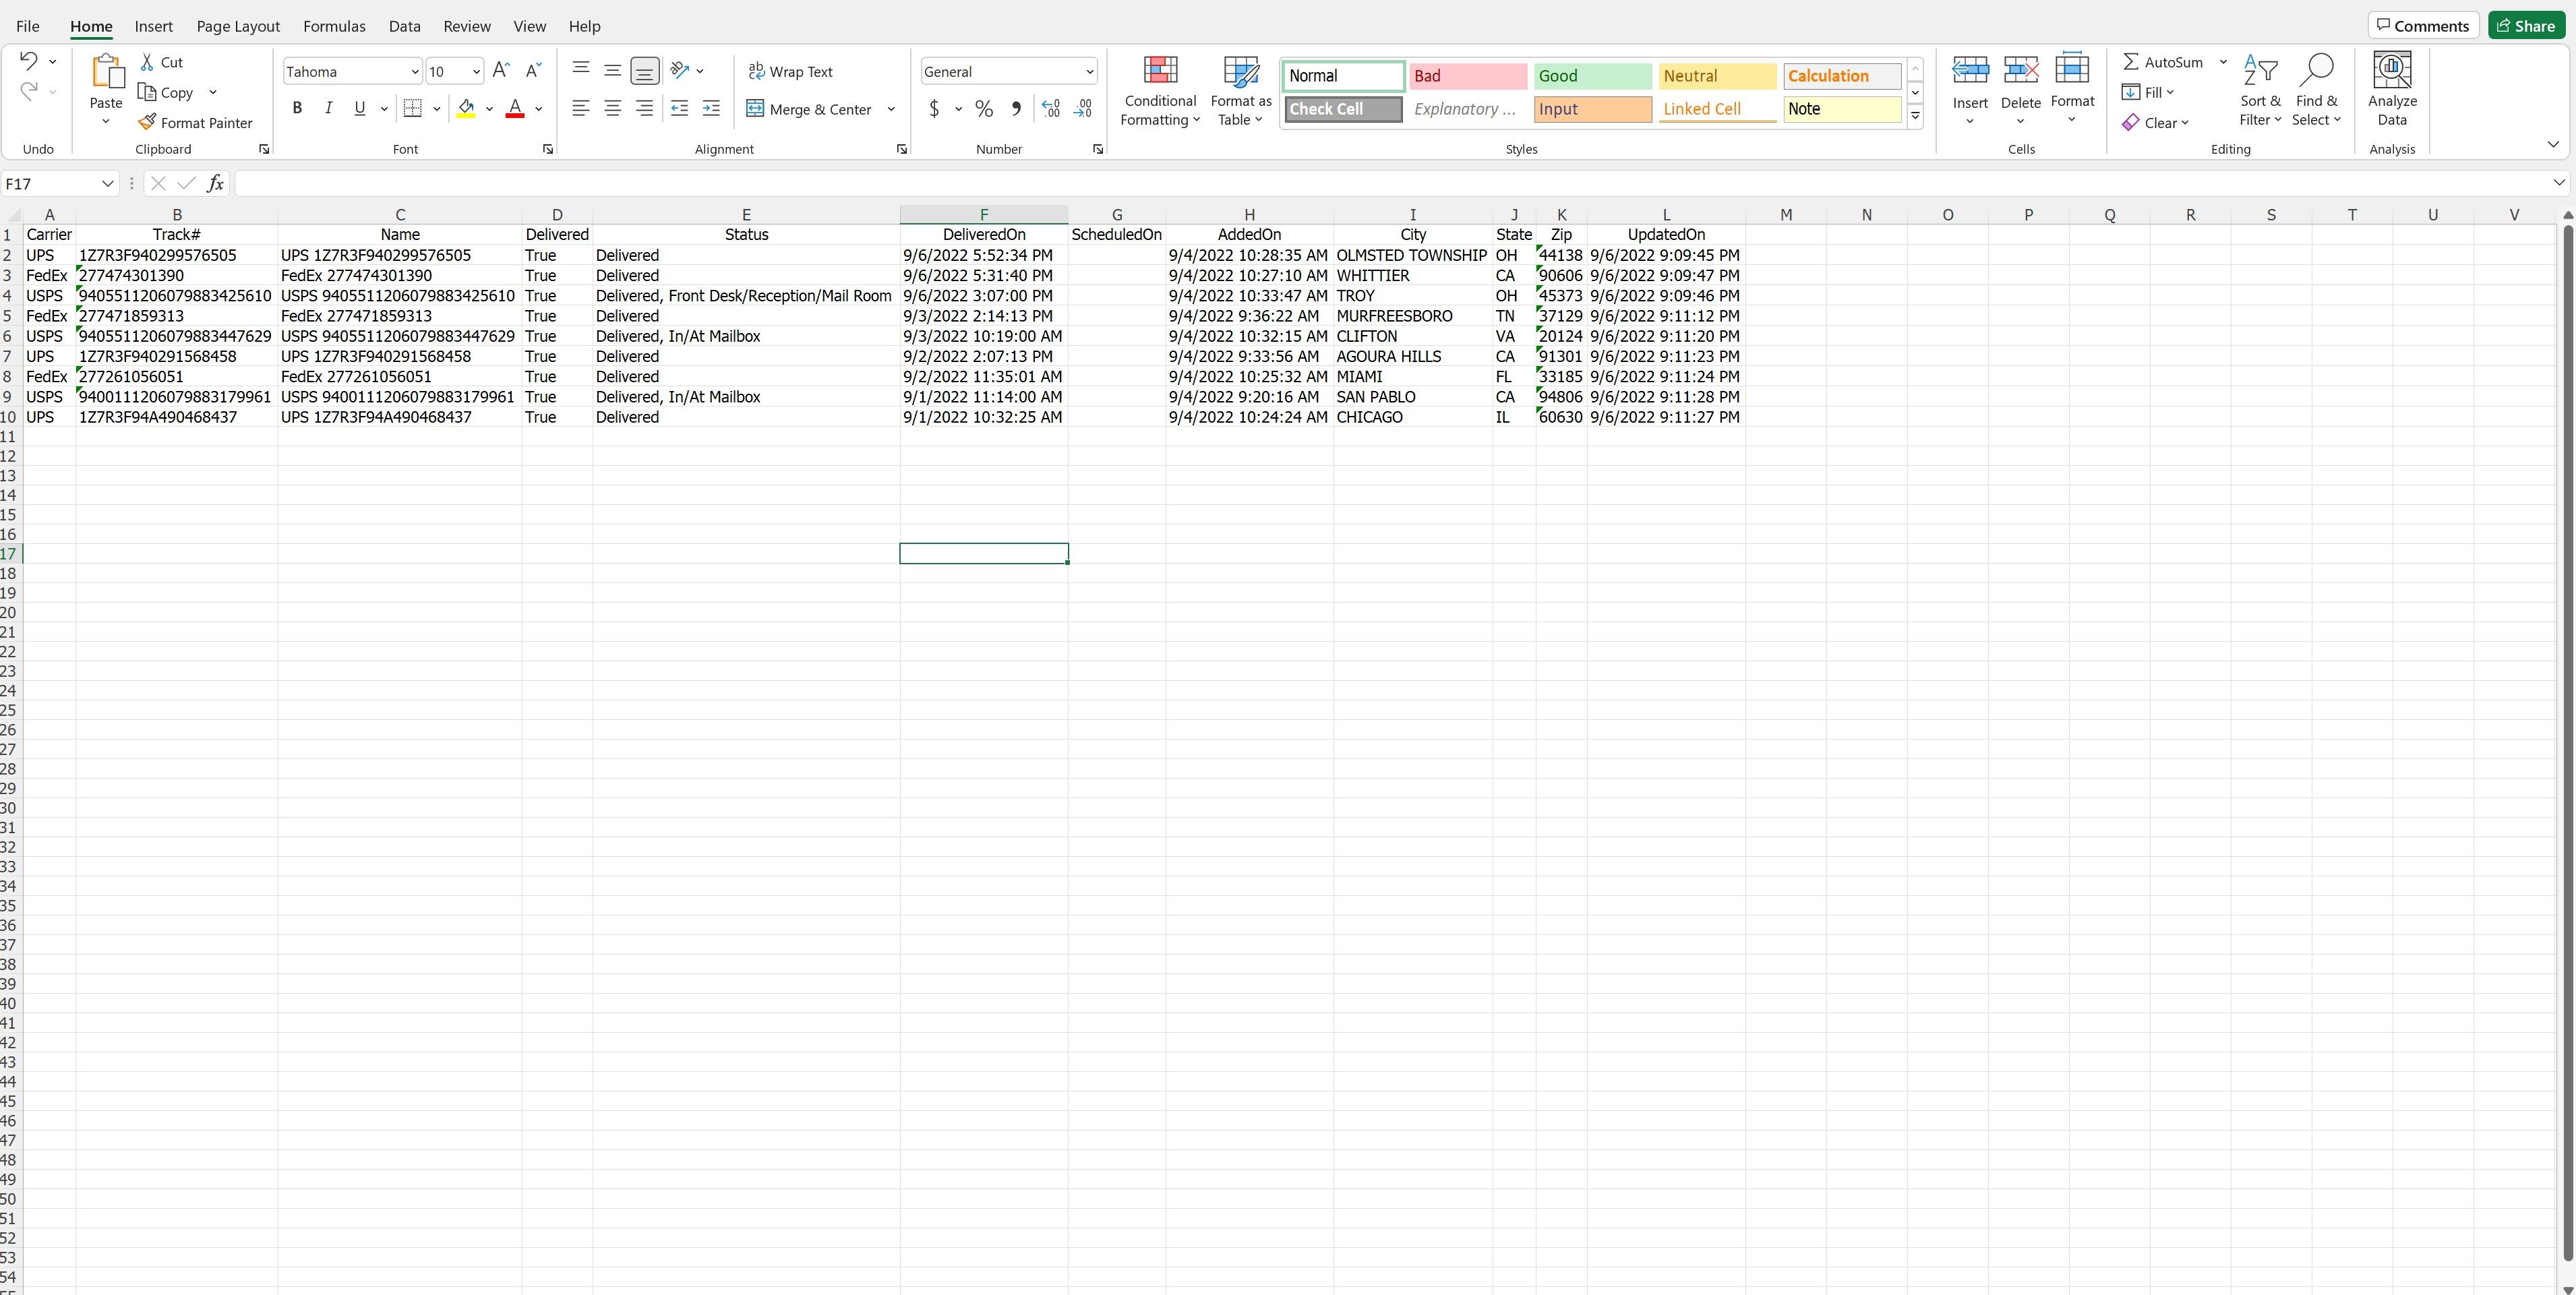 data can be exported to an excel file.